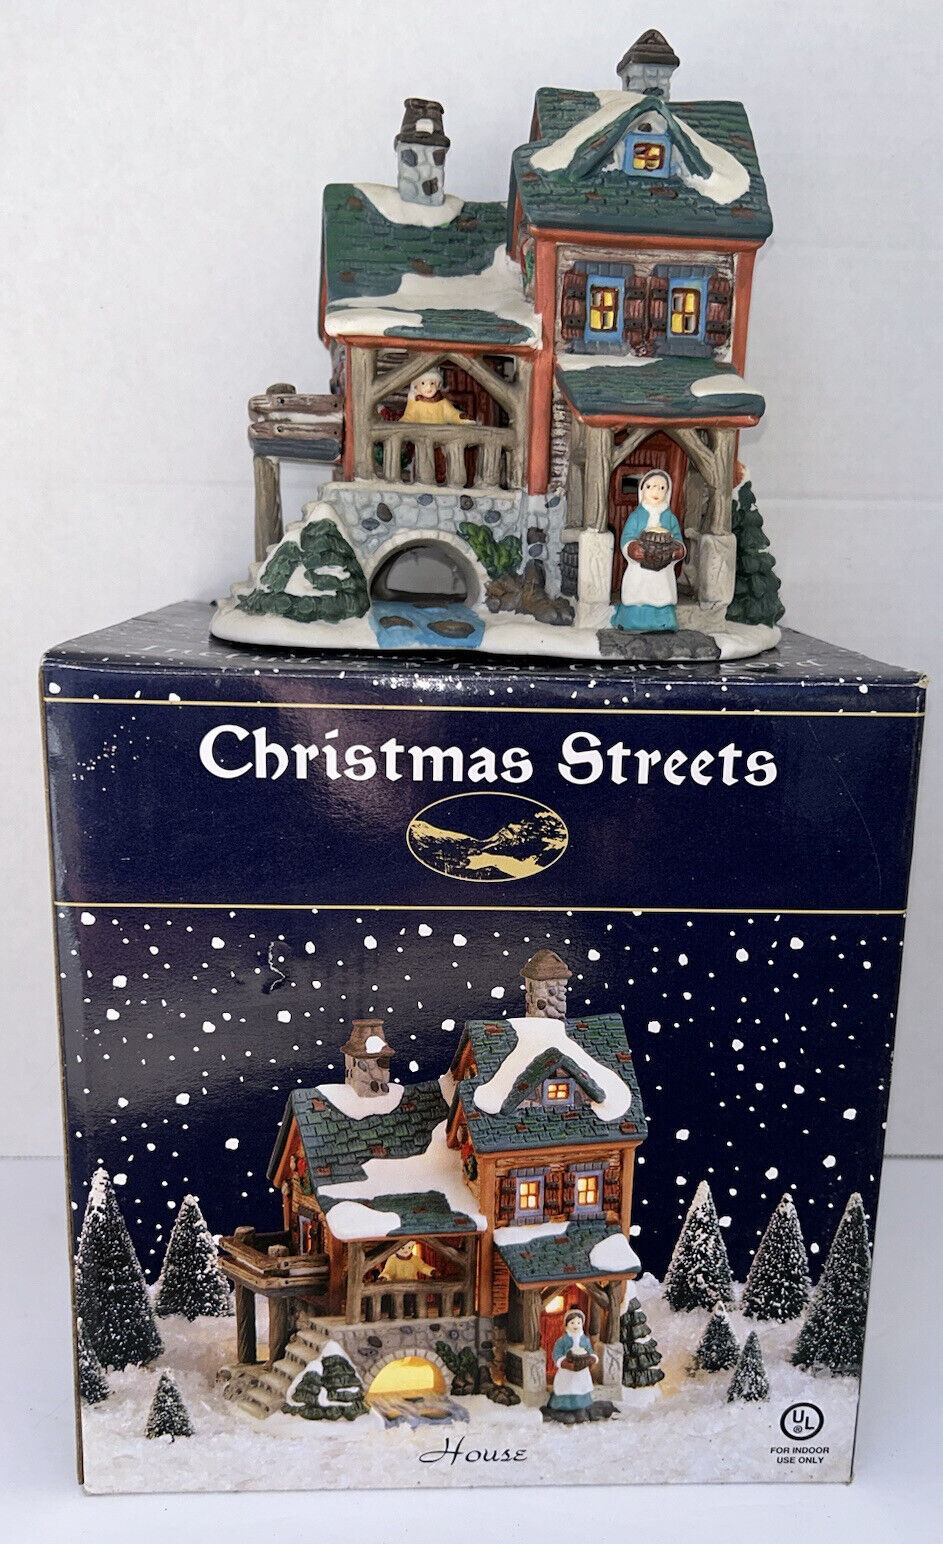 Christmas Streets 2002 Porcelain Lighted Country House Christmas Village